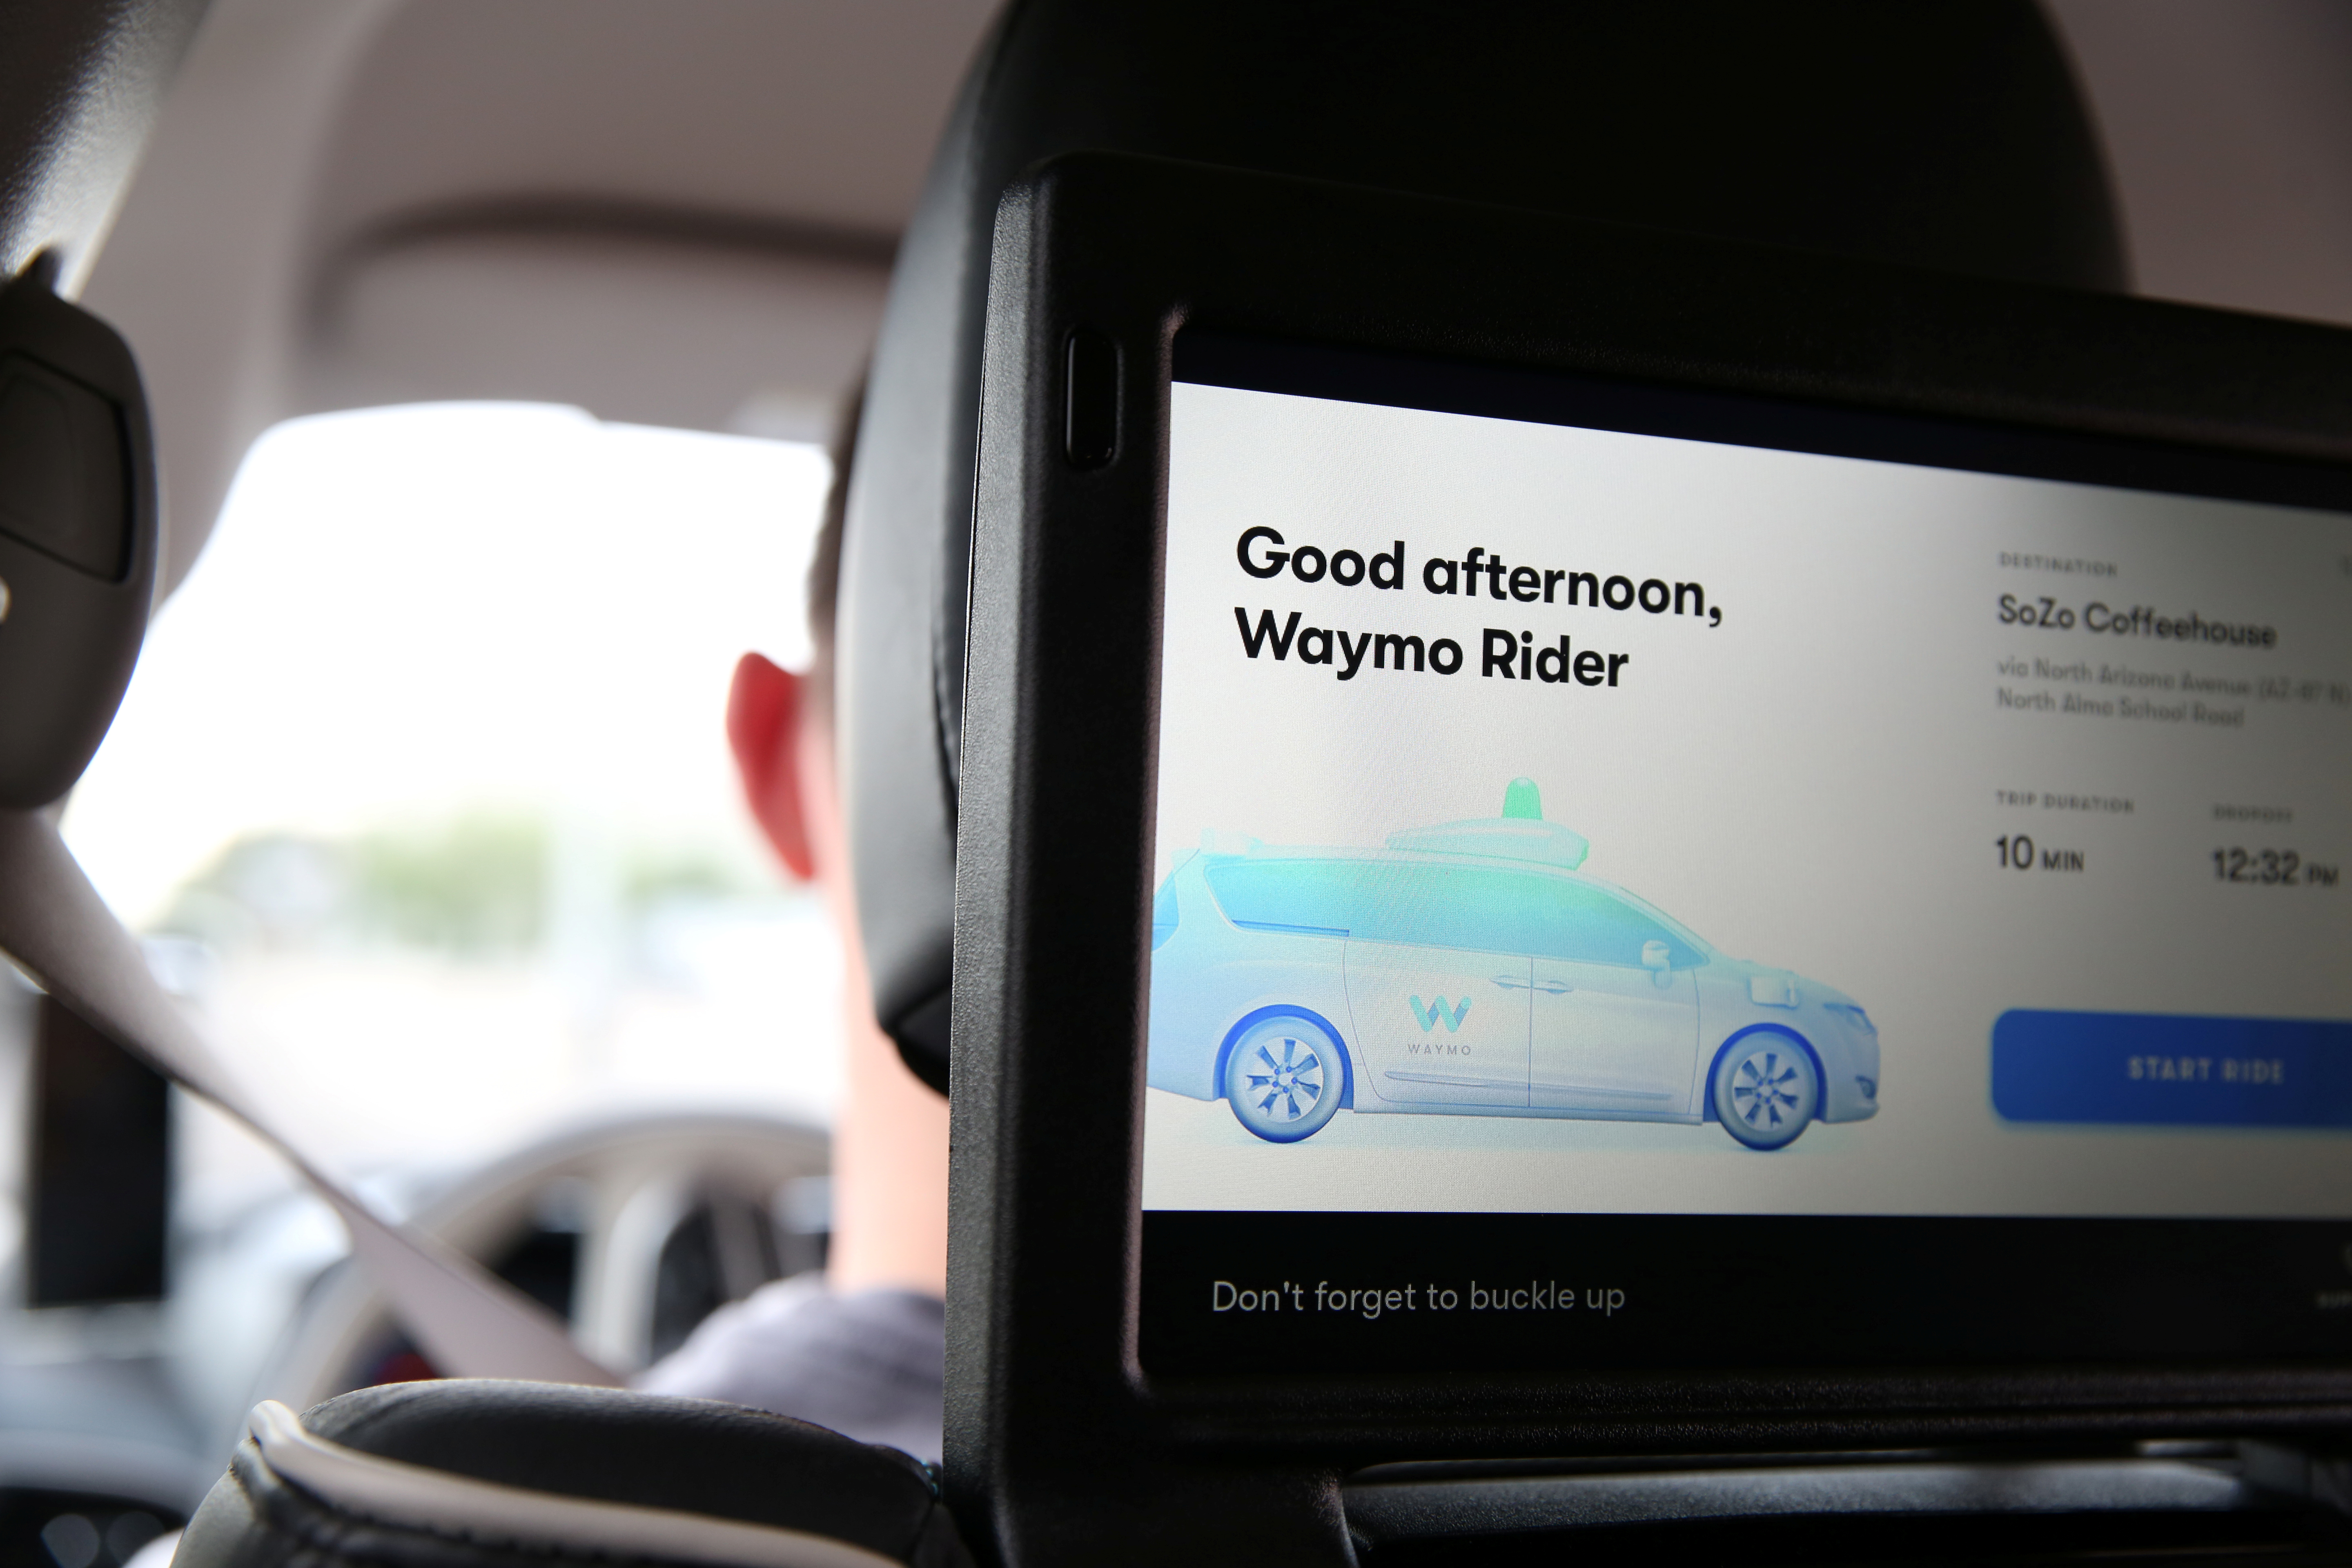 One of three screens displays the user interface inside a Waymo self-driving vehicle, during a demonstration in Chandler, Arizona, November 29, 2018. REUTERS/Caitlin O’Hara/Files